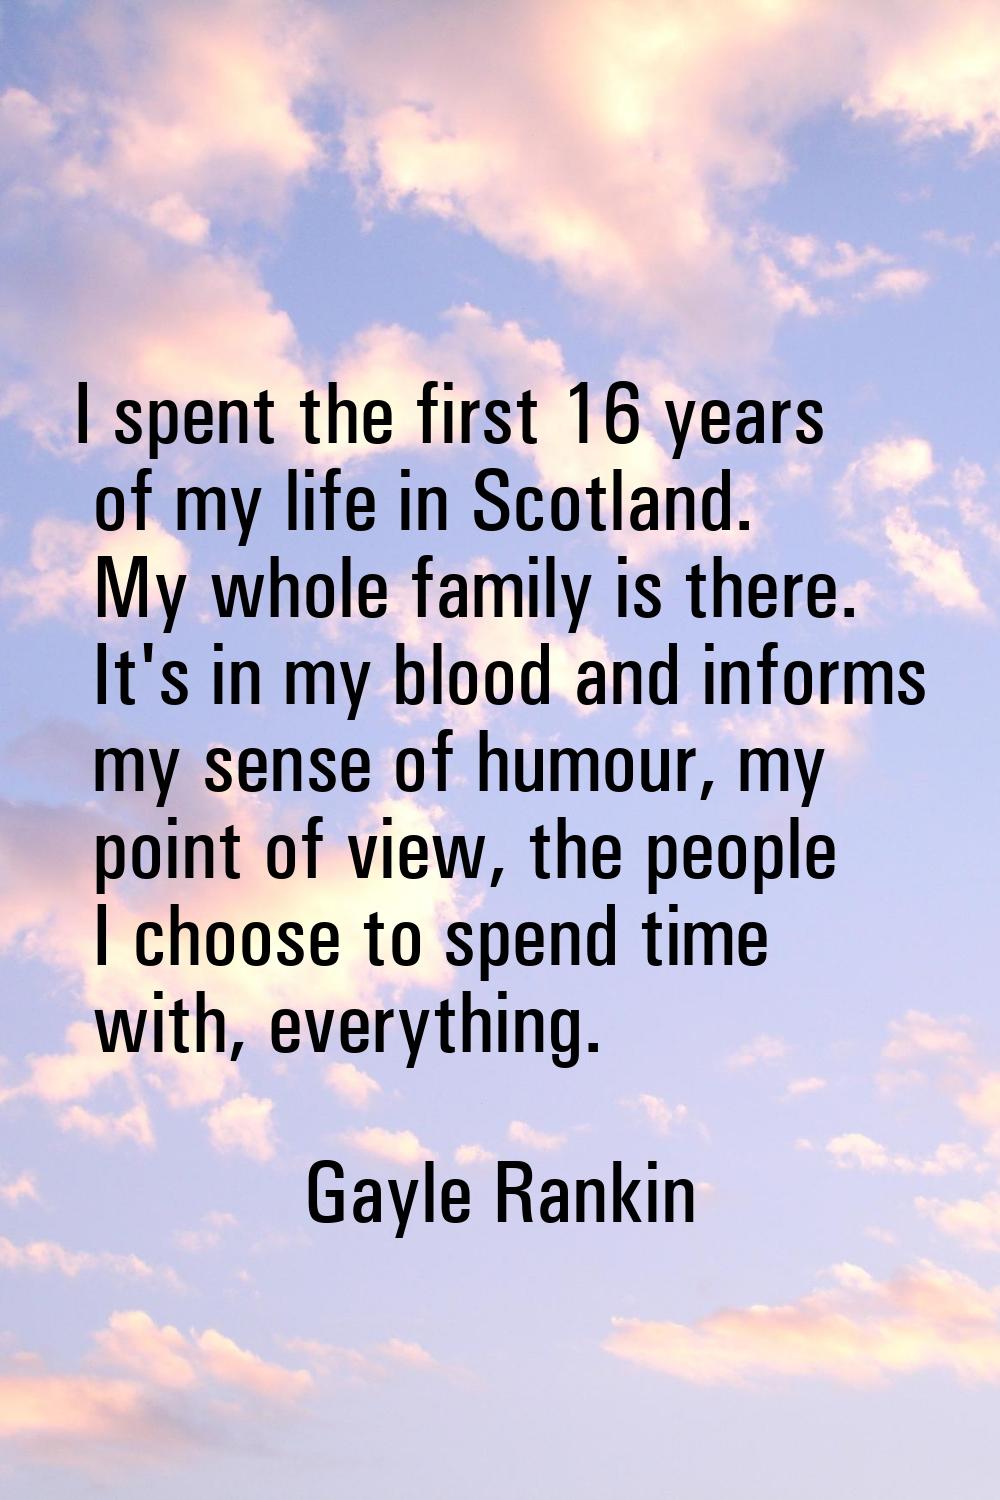 I spent the first 16 years of my life in Scotland. My whole family is there. It's in my blood and i